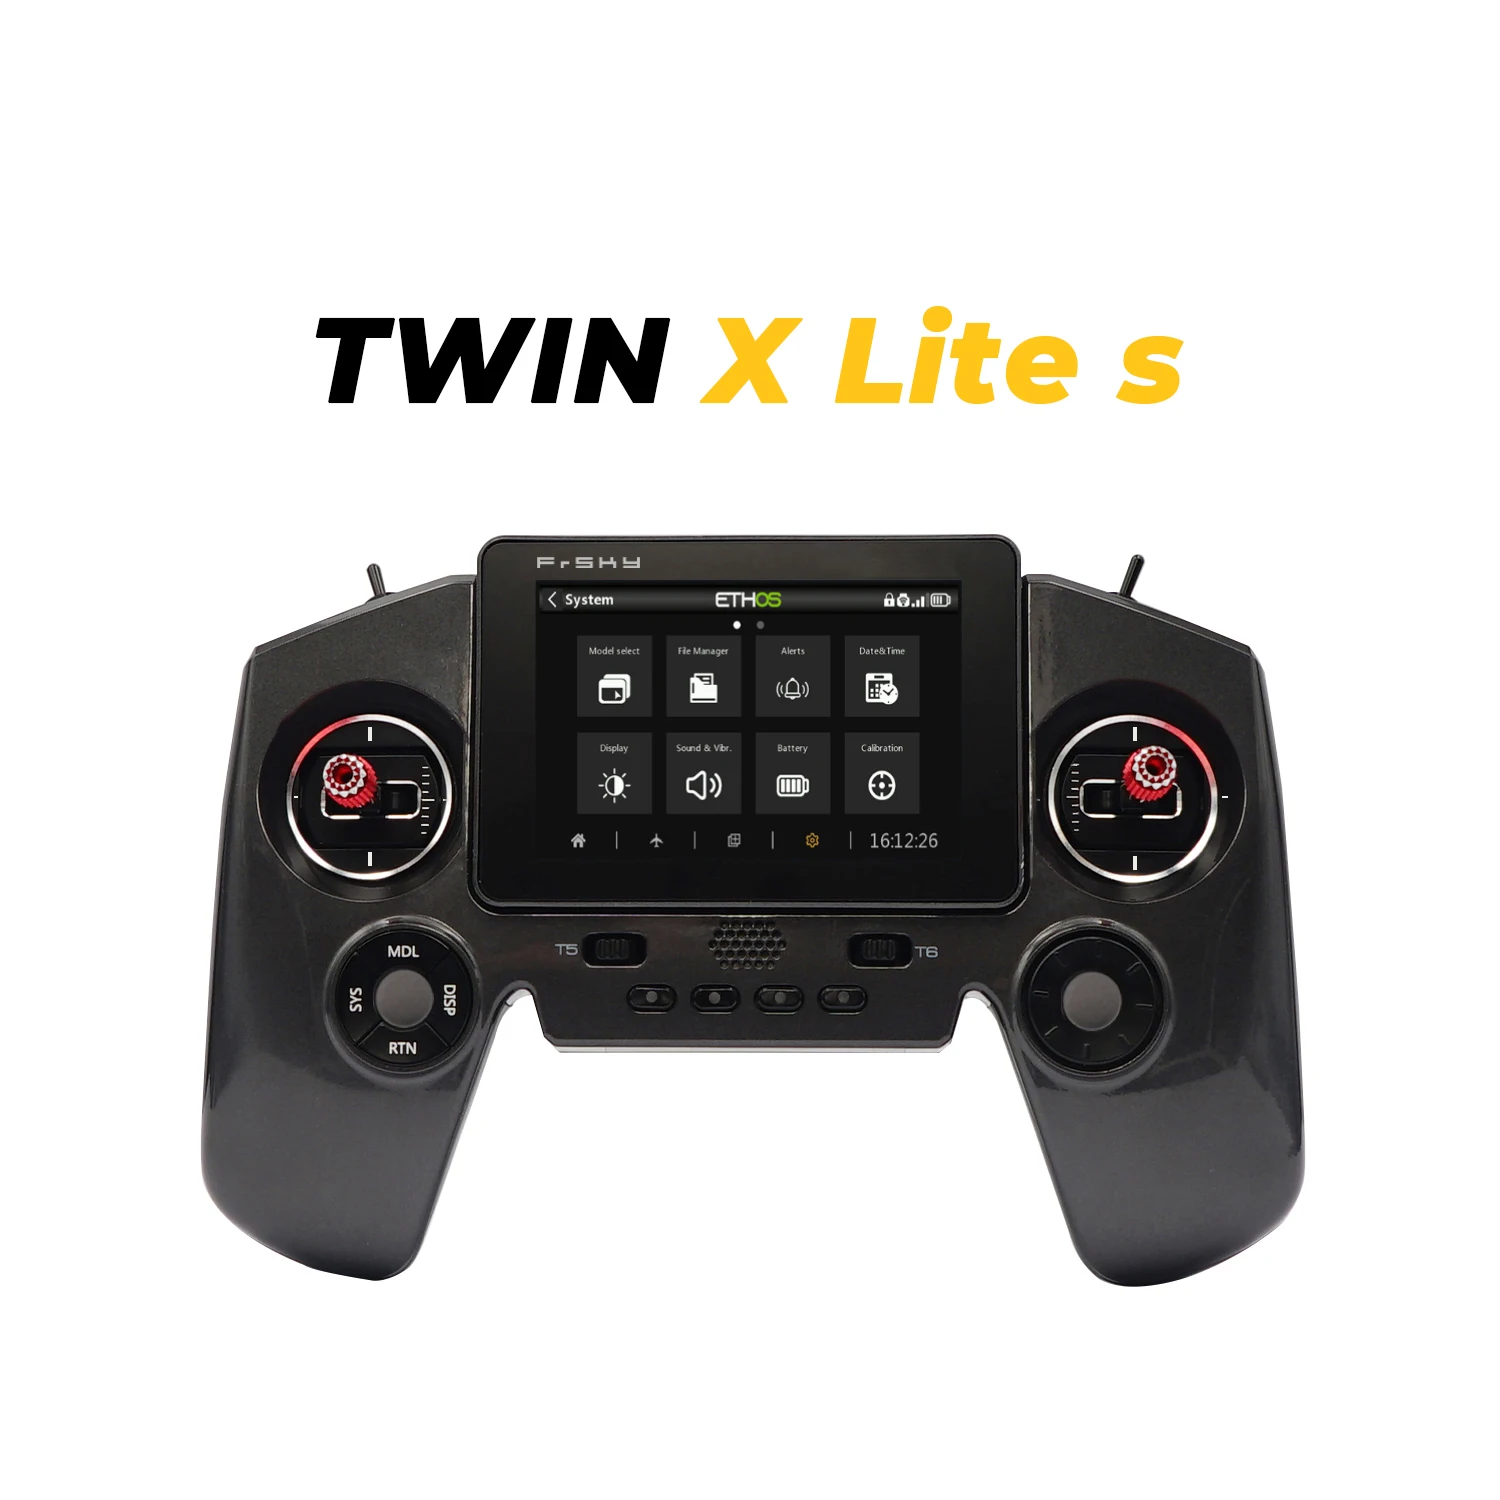 

FrSky TWIN X-Lite S XLiteS Transmitter Dual 2.4G Radio System Compatibility ELRS / ACCST D16 / ACCESS / TW modes